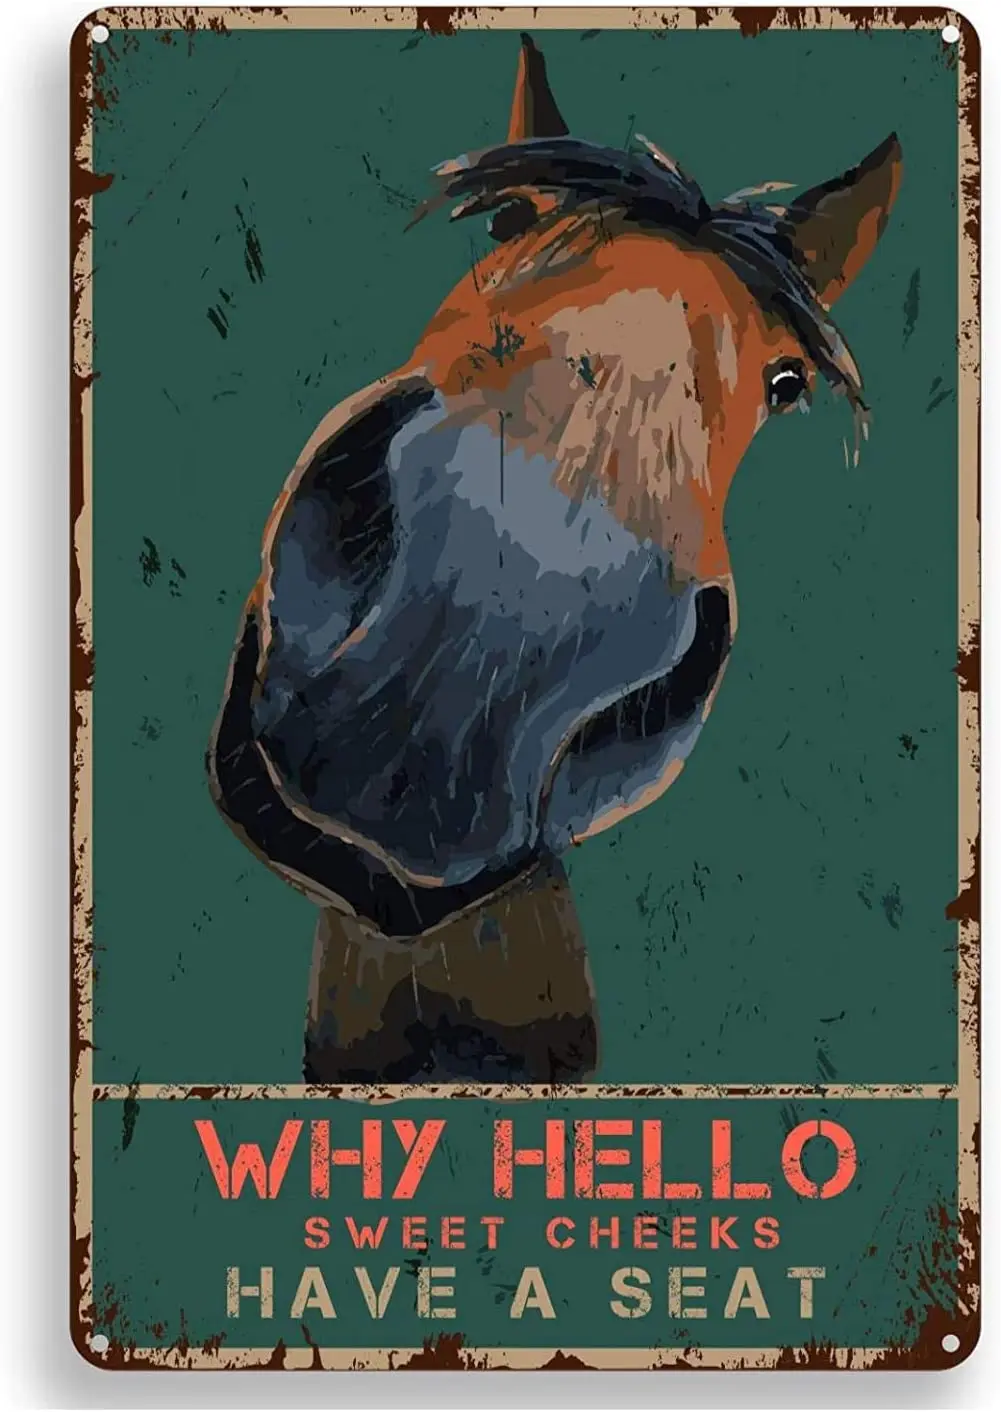 

Funny Bathroom Quote Metal Tin Sign Wall Decor - Vintage Hello Sweet Cheeks Horse Tin Sign for Office/Home/Classroom Bathroom